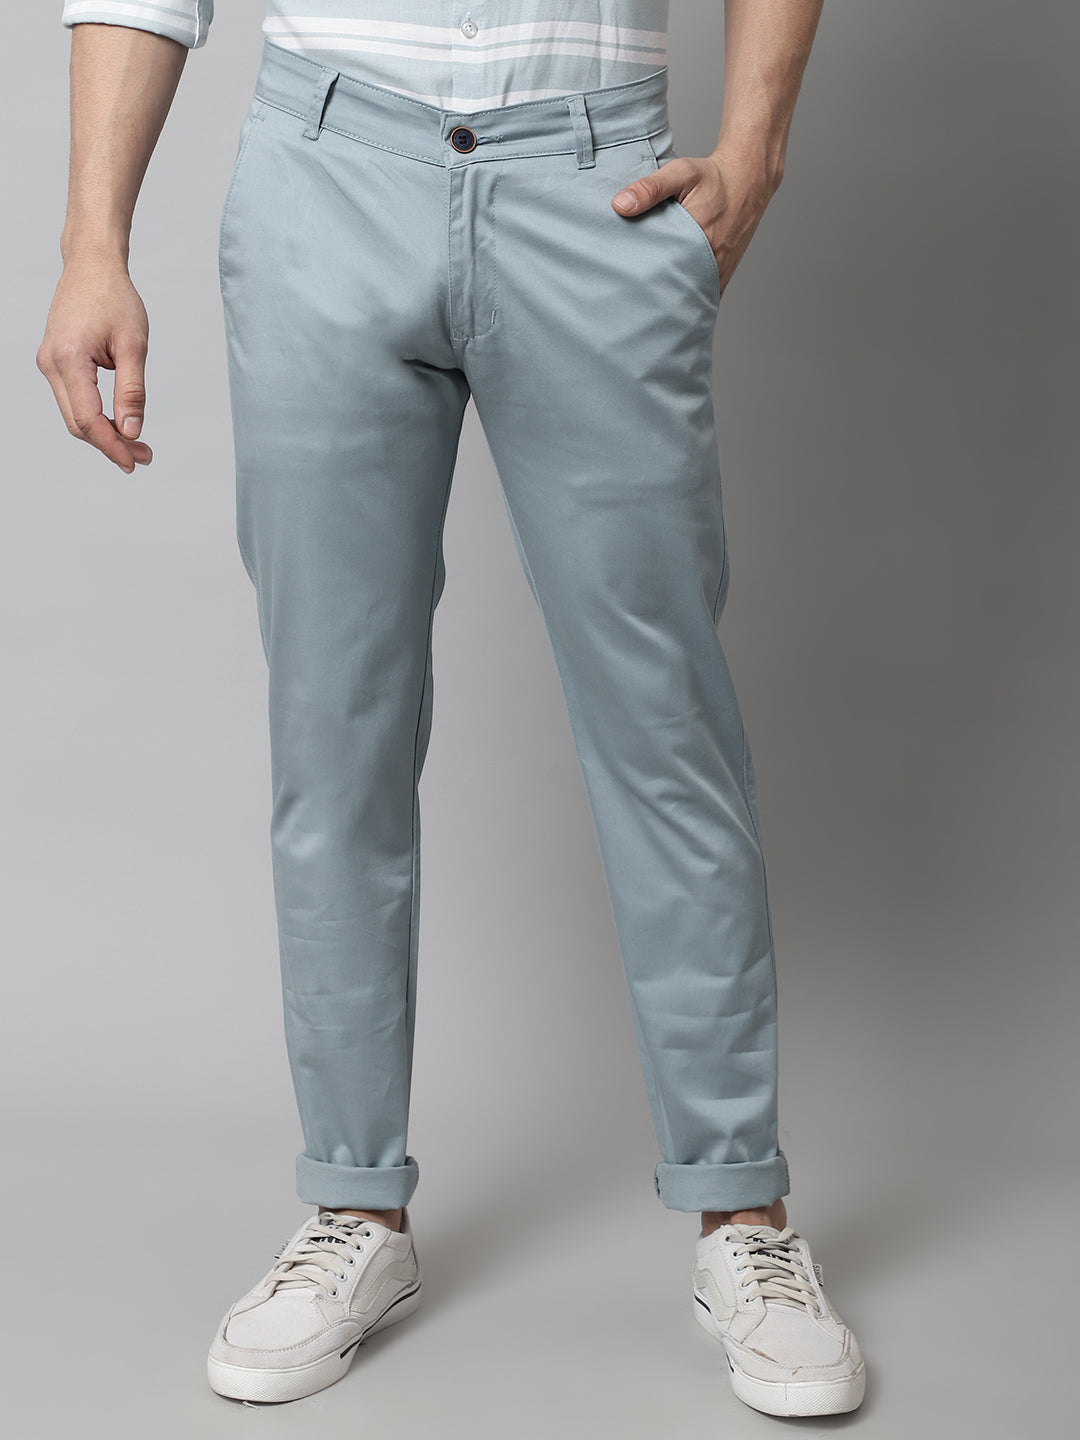 Majestic Man Regular Fit Satin Finish Cotton Casual Solid Chinos Trouser - Sea Blue